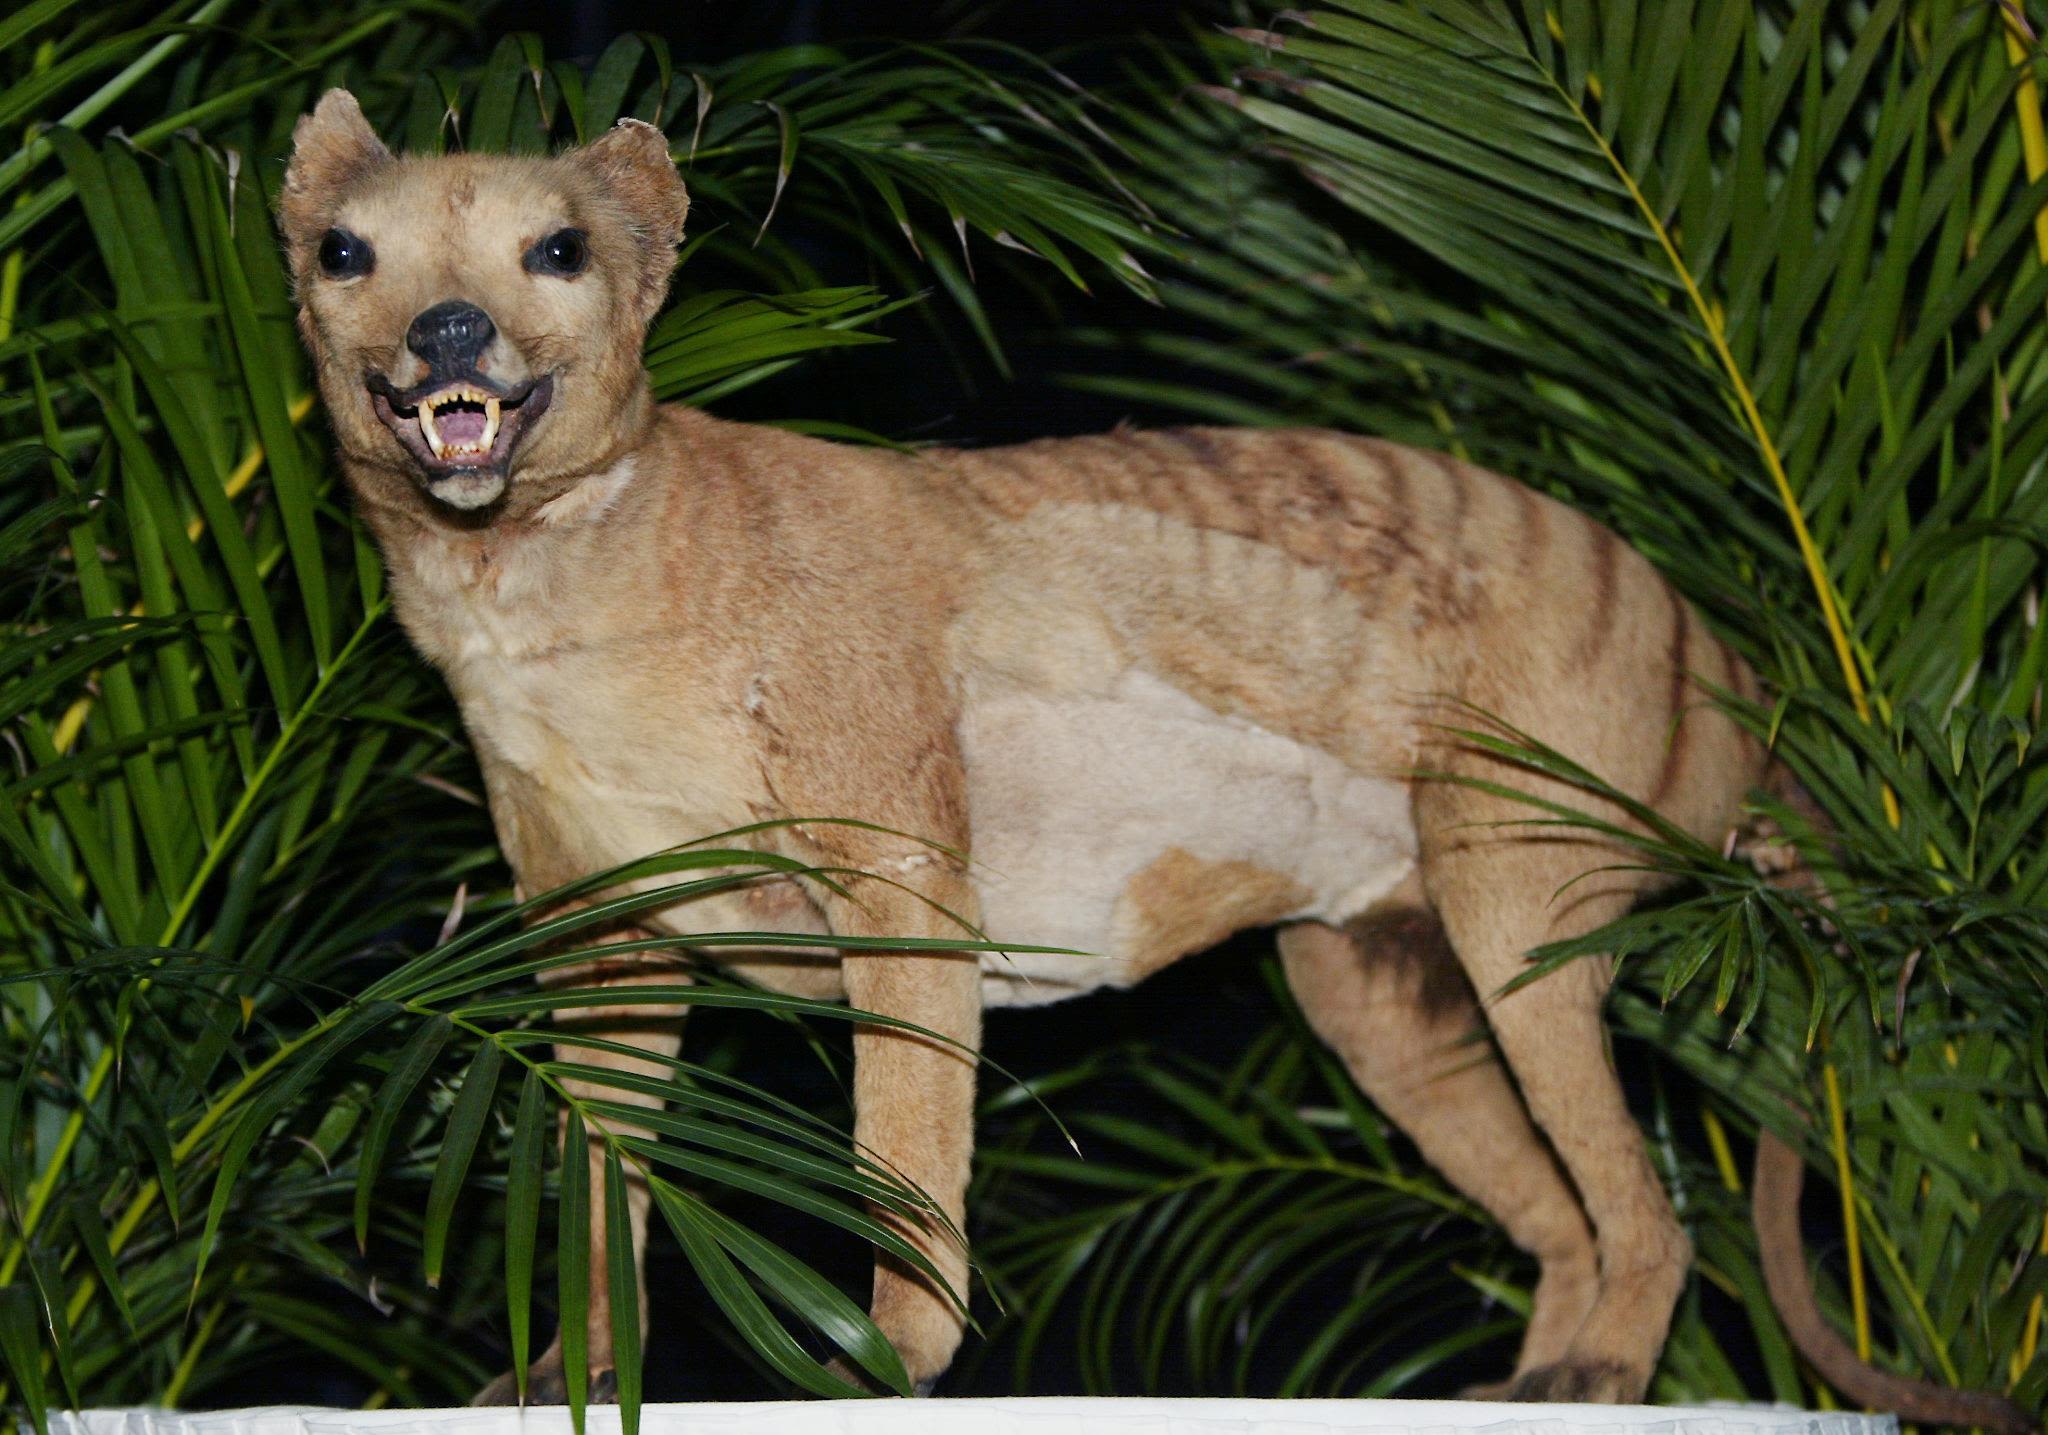 People are reporting sightings of the Tasmanian tiger, thought to